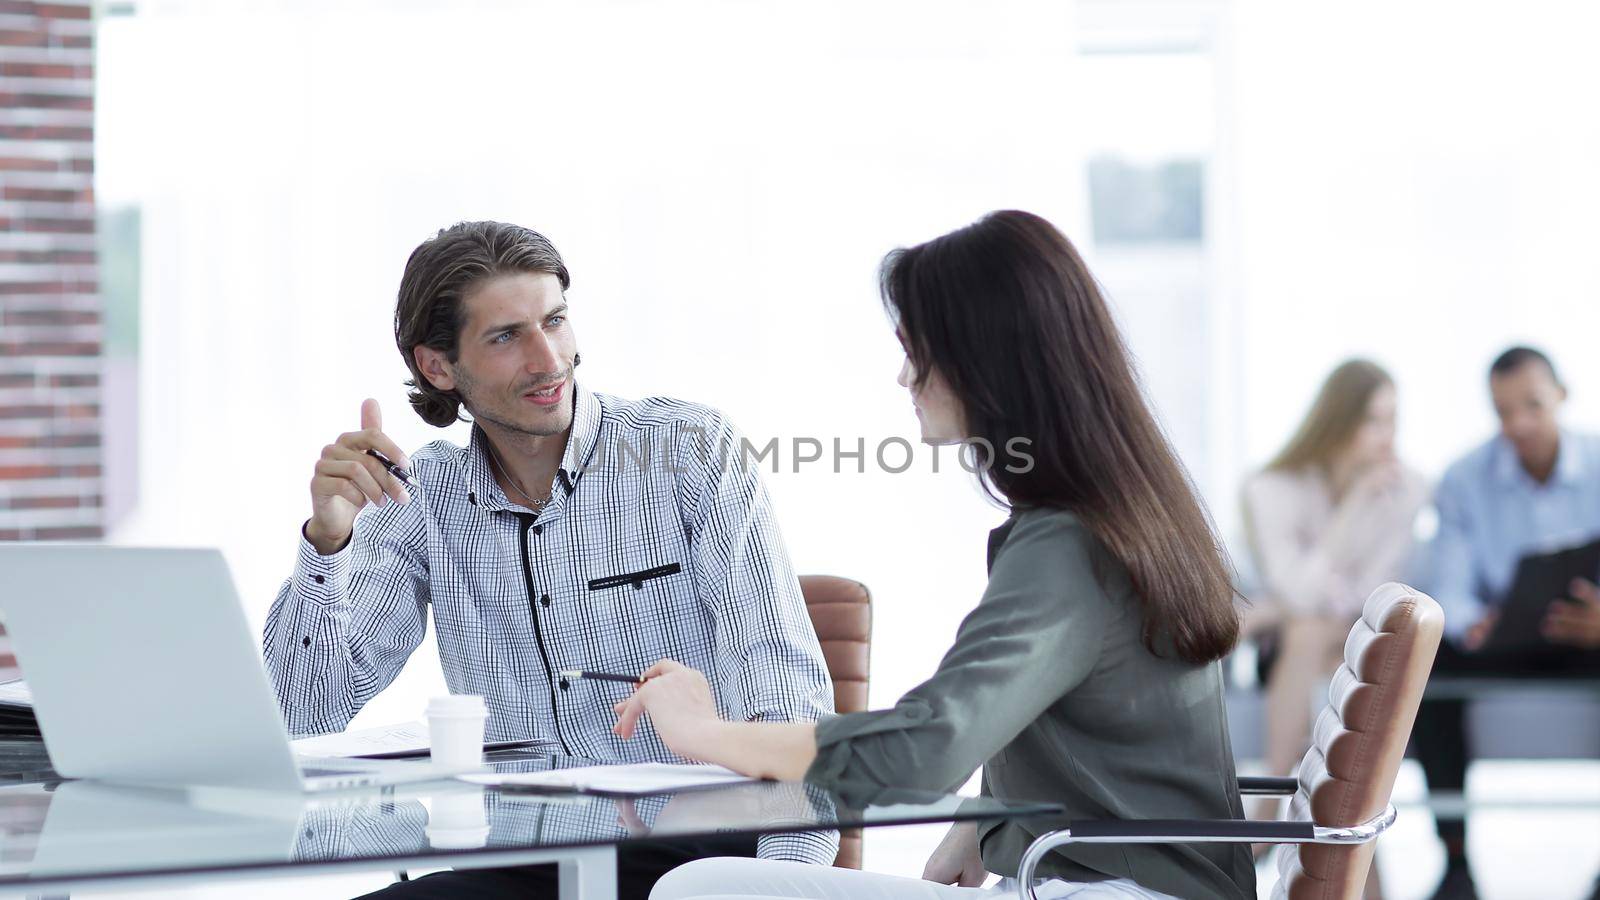 Manager prepares the contract with the client by SmartPhotoLab